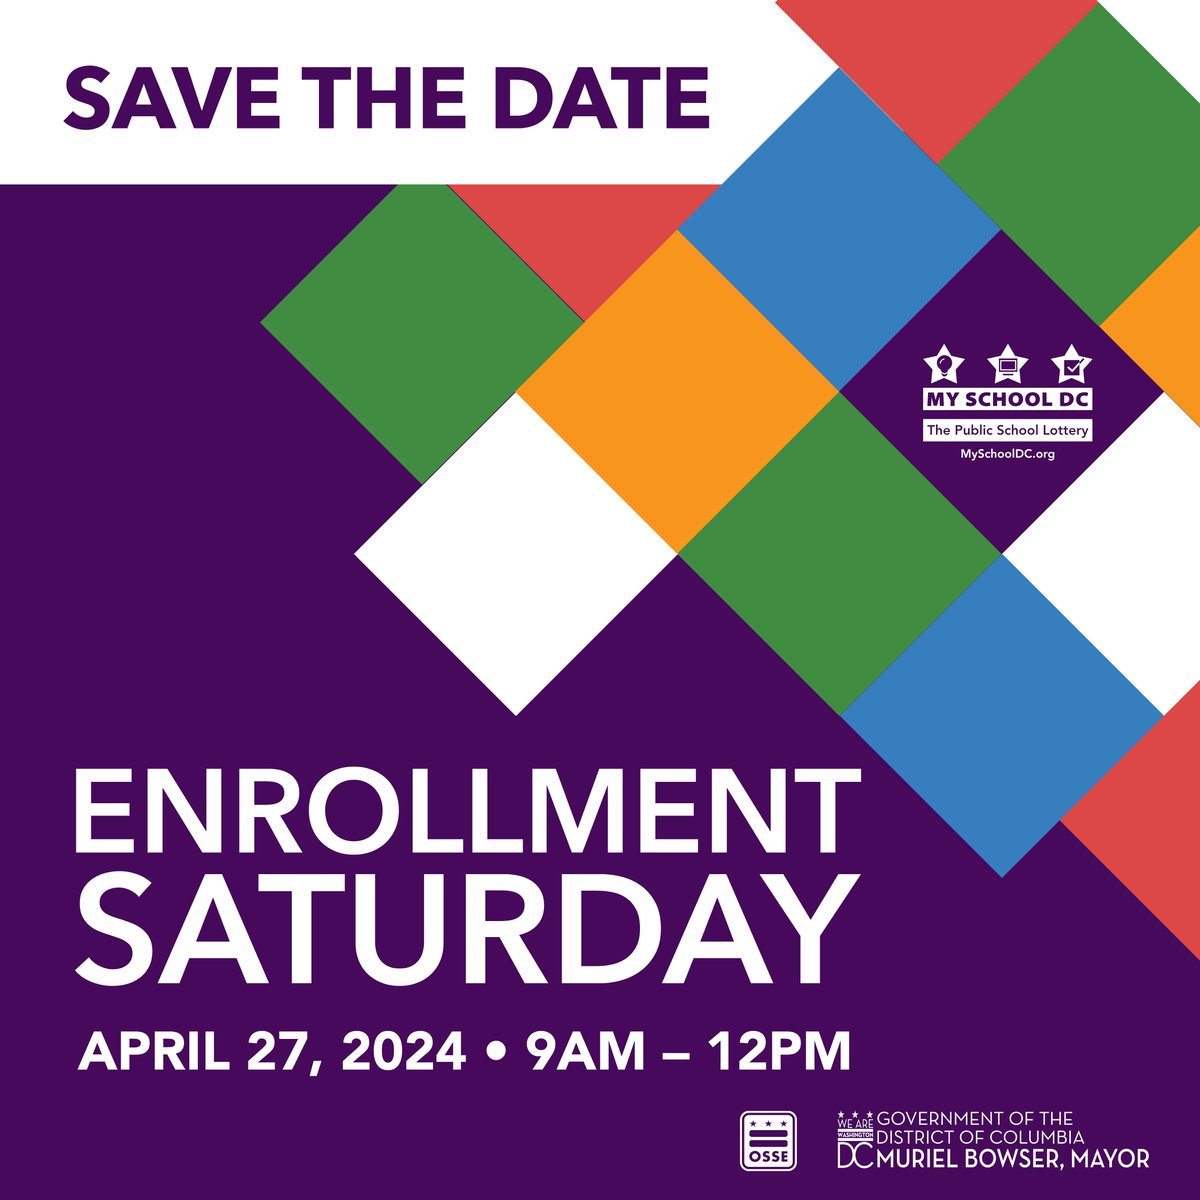 Enrollment Saturday is April 27 from 9 a.m. - 12 p.m. Select @dcpublicschools and @dcpcsb schools will be open to receive your enrollment materials in person. Learn more here: buff.ly/40T4ivN